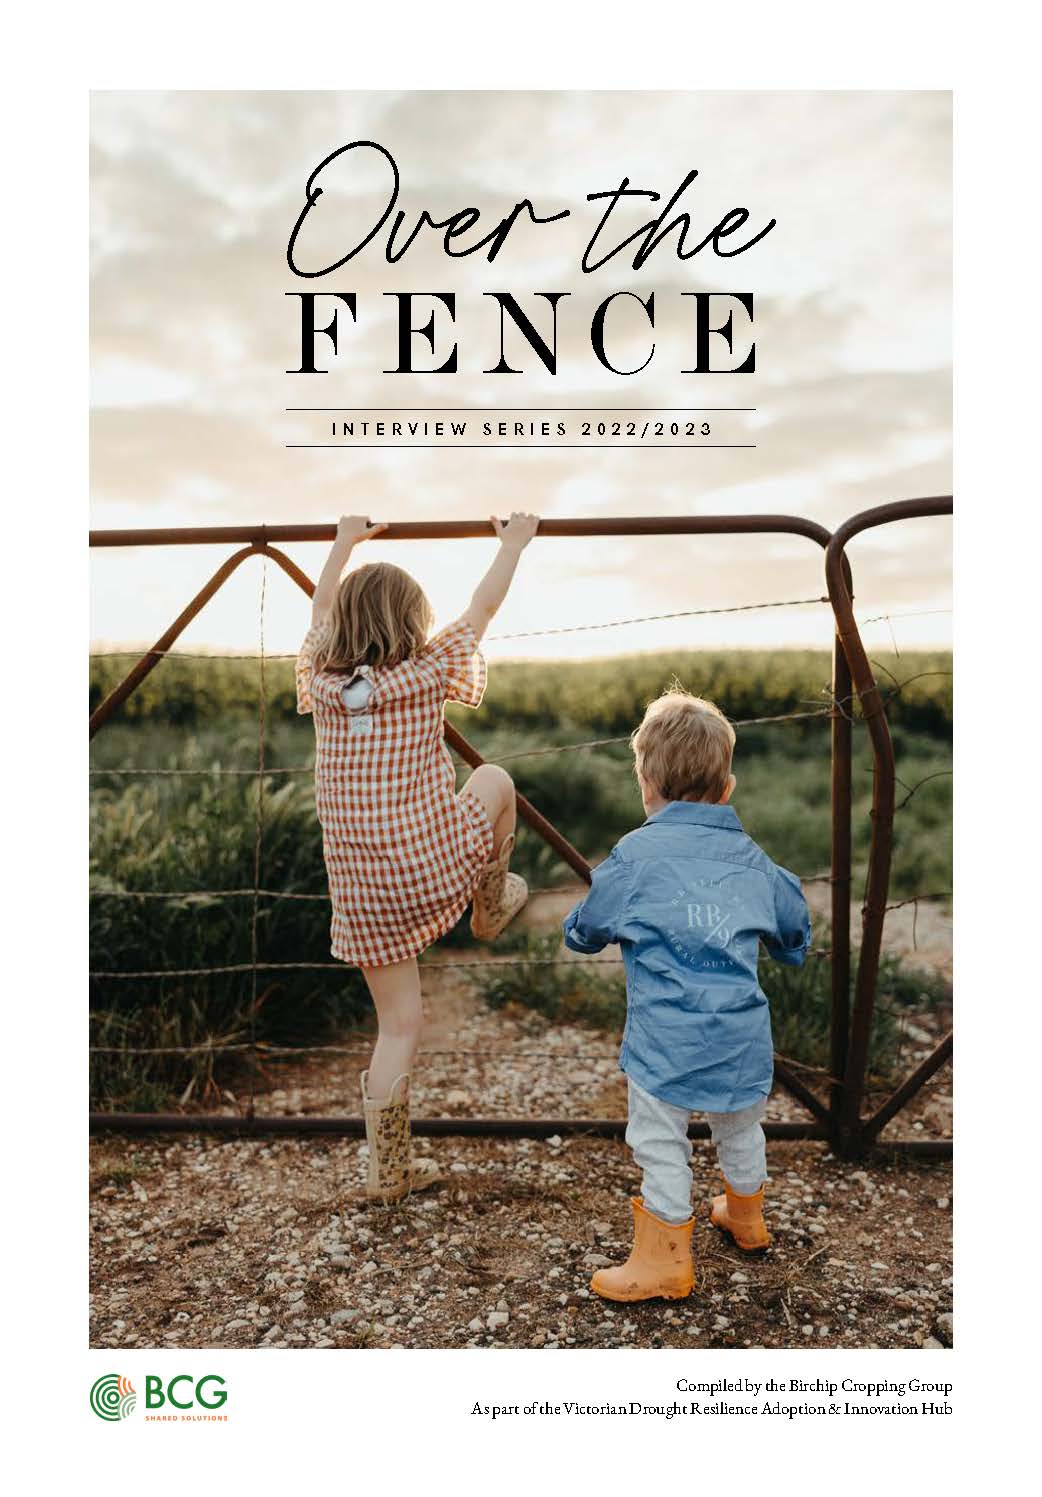 Over The Fence’ is a new book to share innovative ideas and information among farming families in North-West Victoria